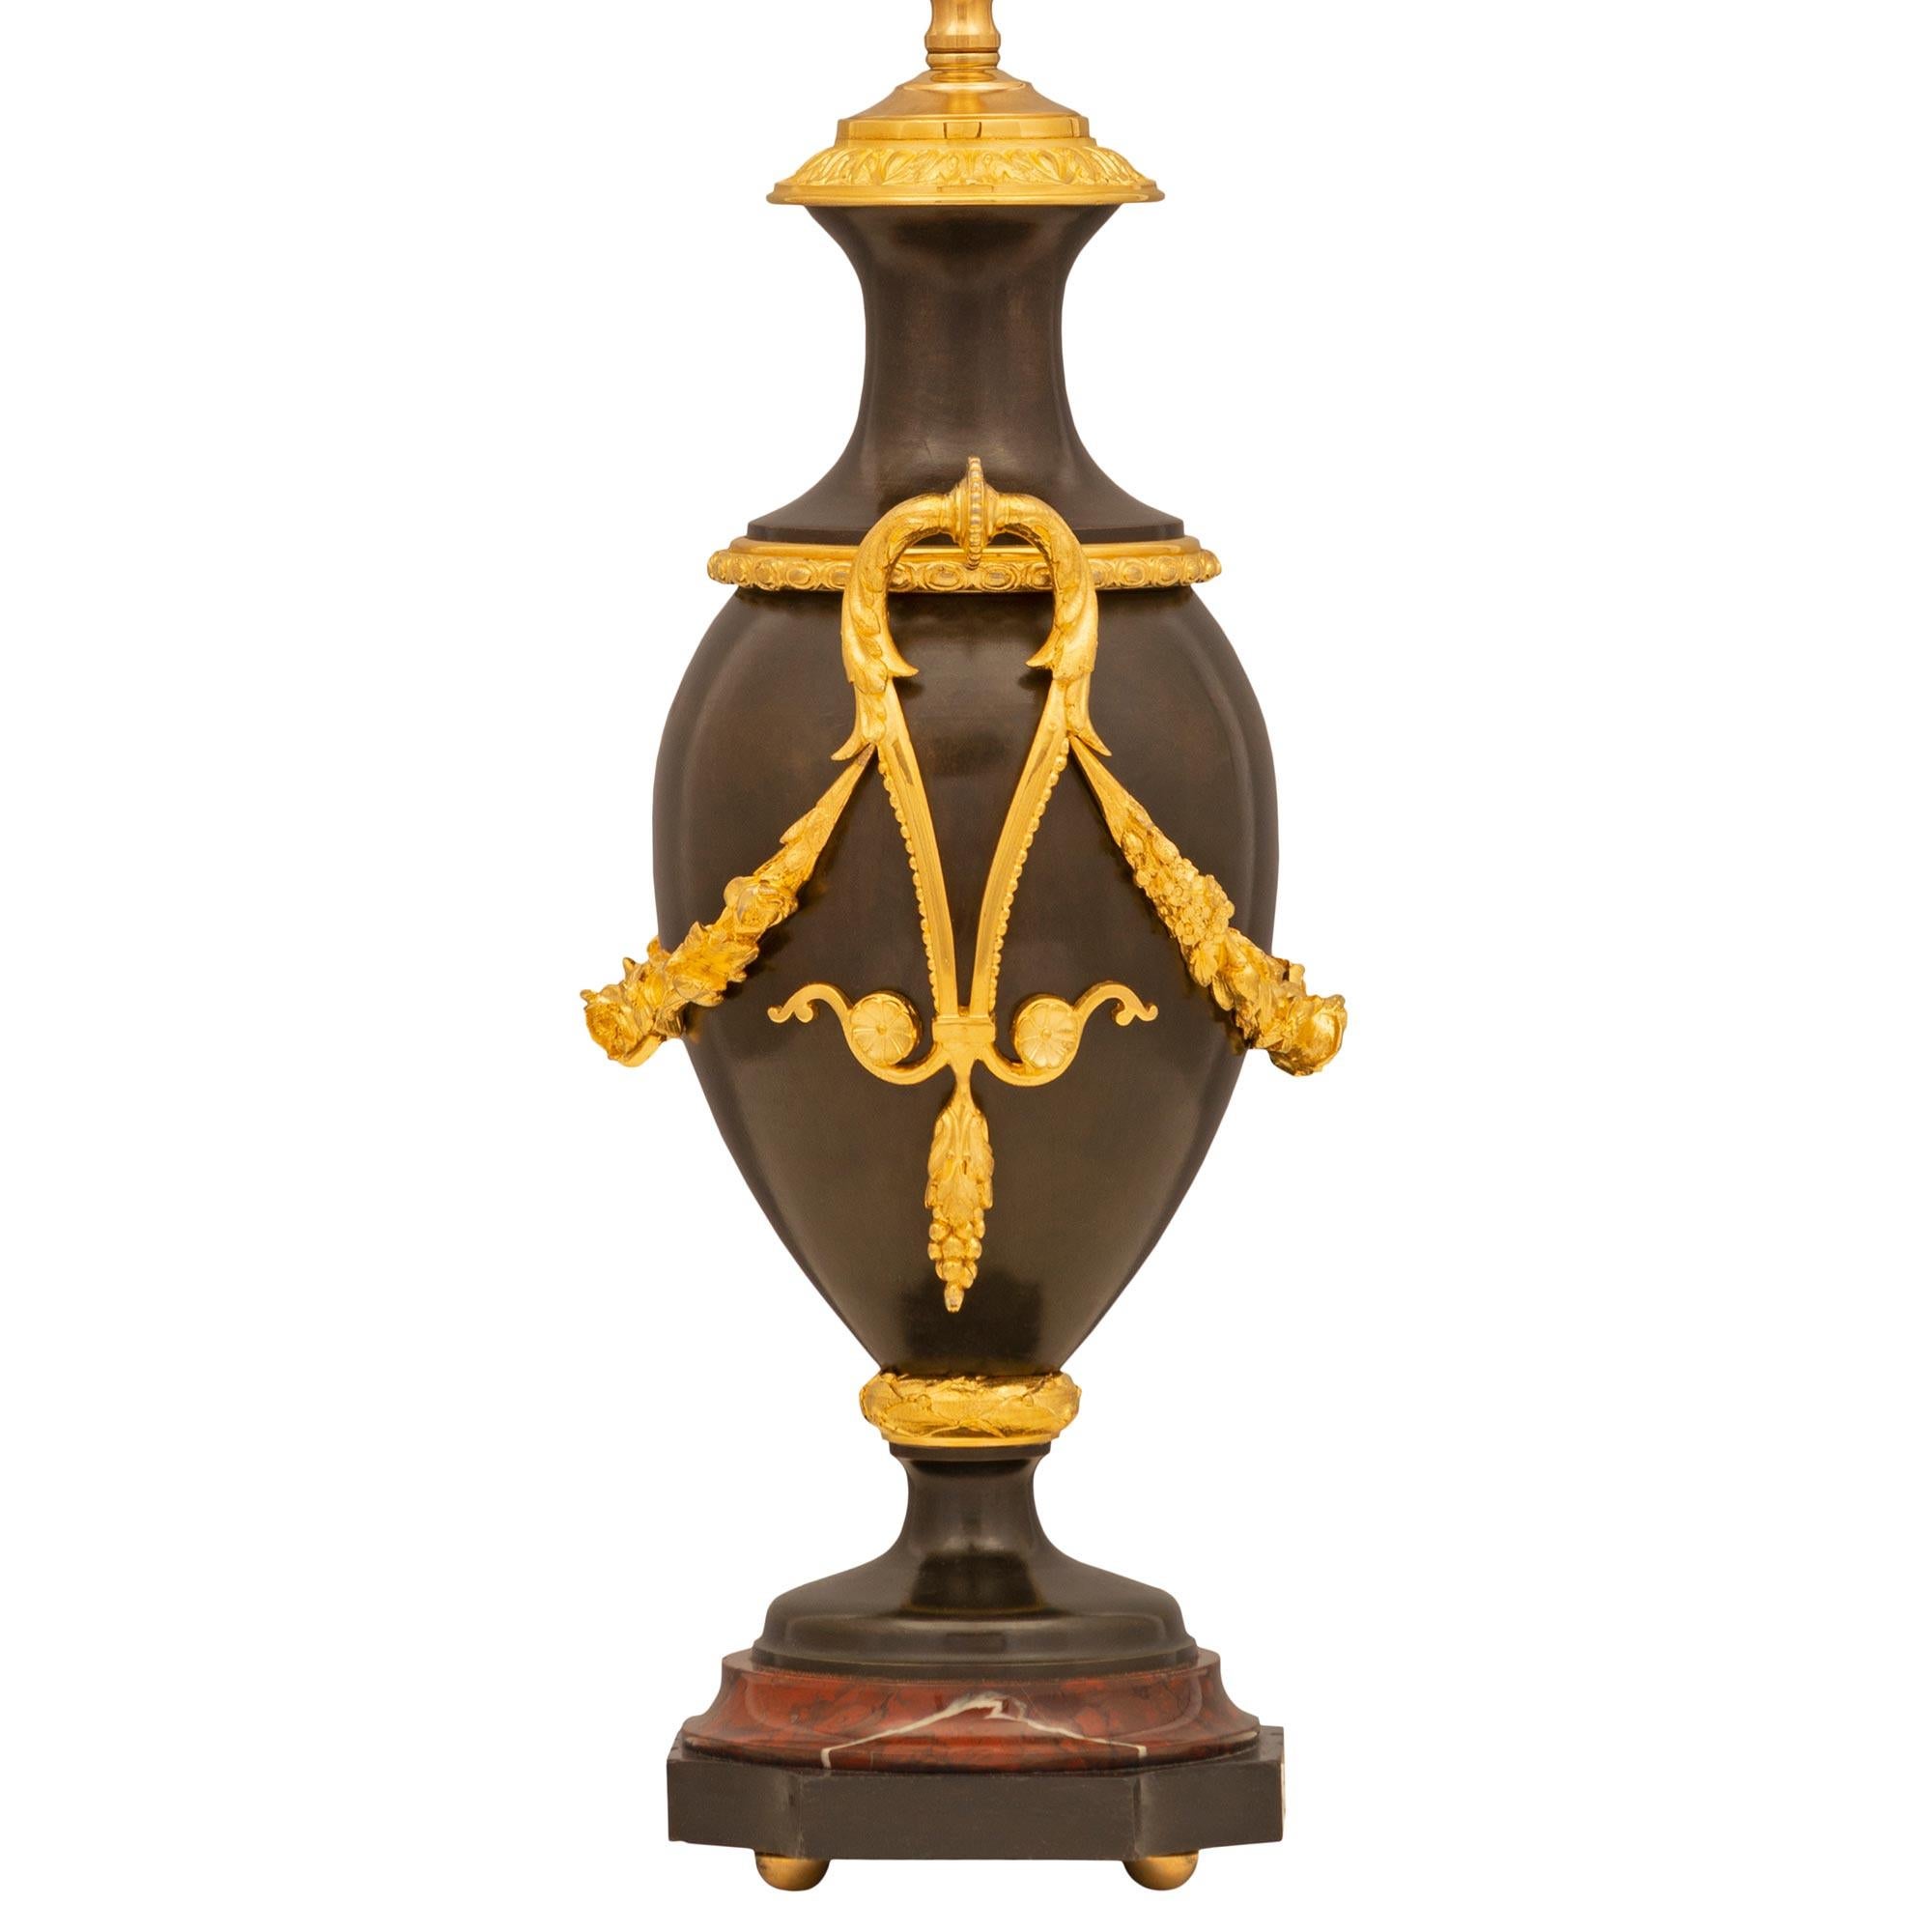 A remarkable pair of French 19th century Louis XVI st. patinated bronze, ormolu, and Rouge Griotte marble lamps. Each lamp is raised by elegant ormolu ball feet below the square patinated bronze base with concave corners and a most decorative